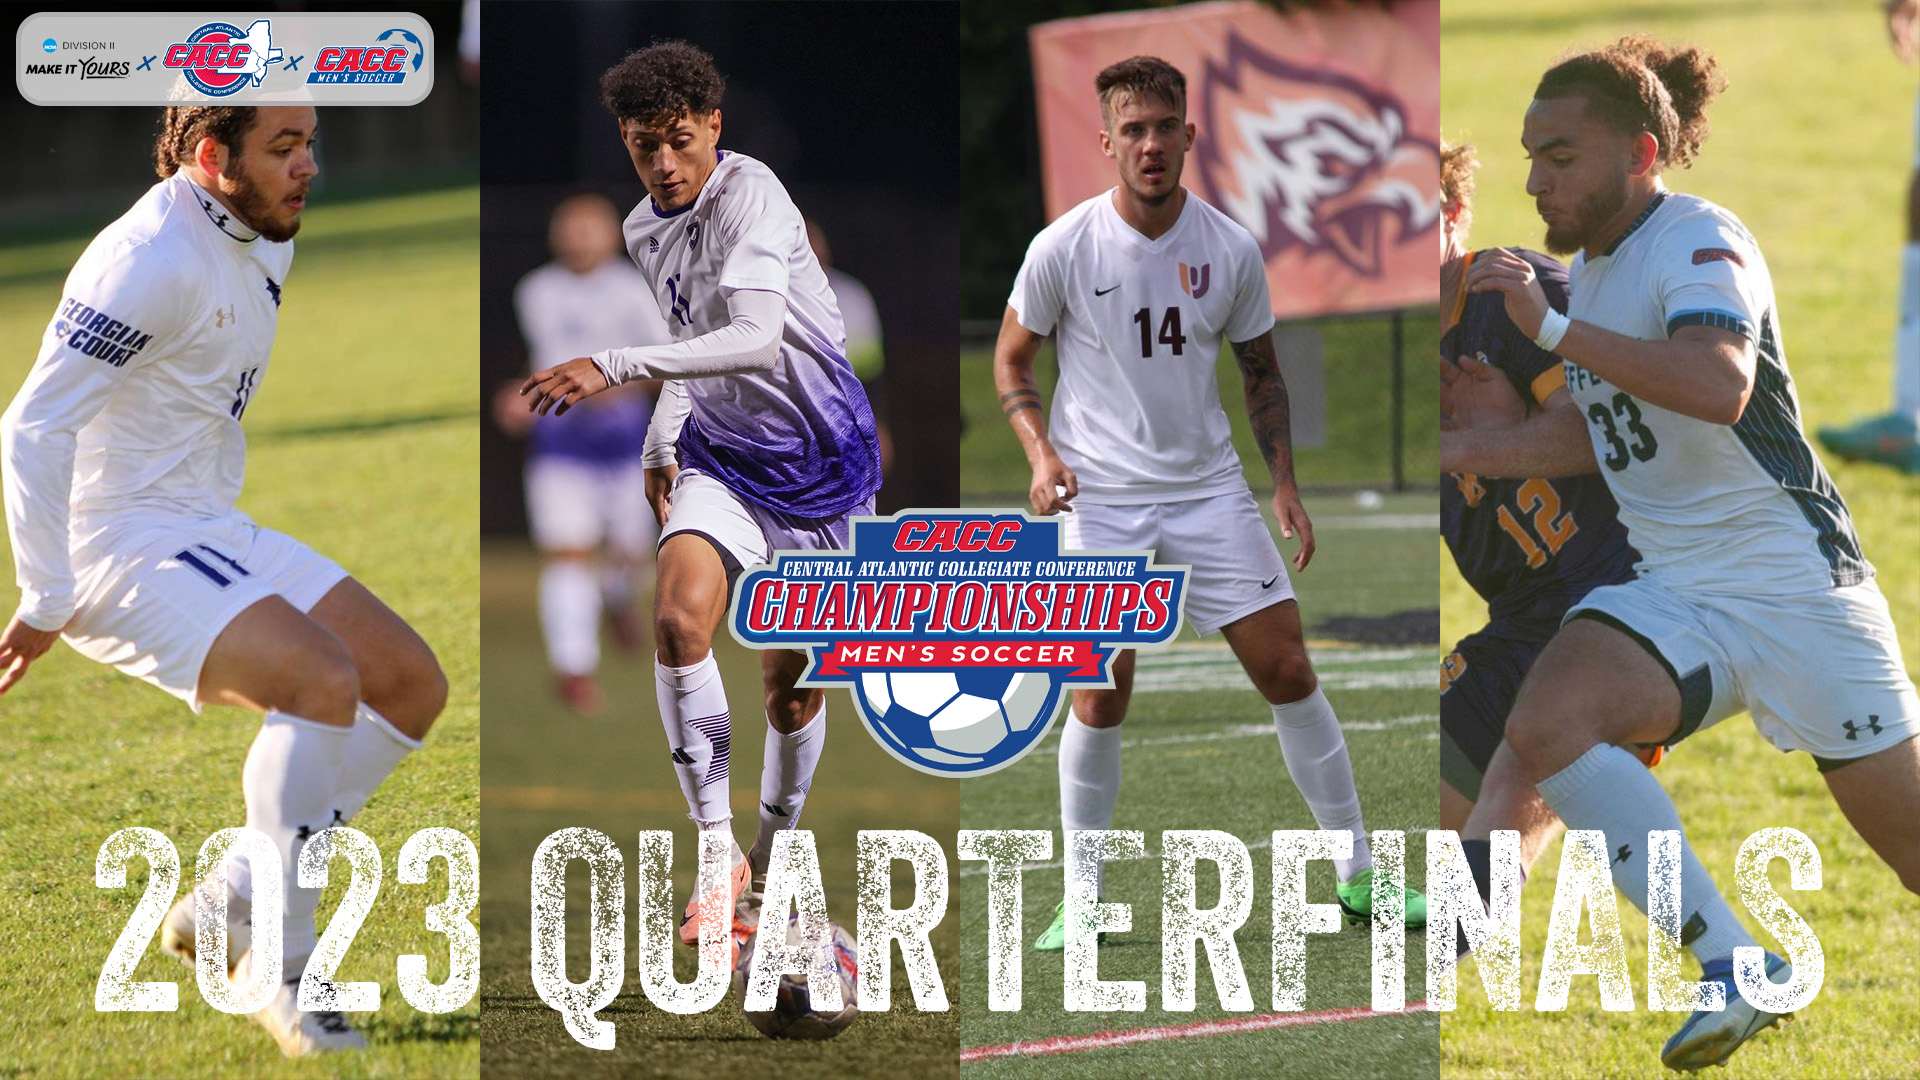 Two Lower Seeds Advancing Highlights Monday's MSOC Quarterfinals